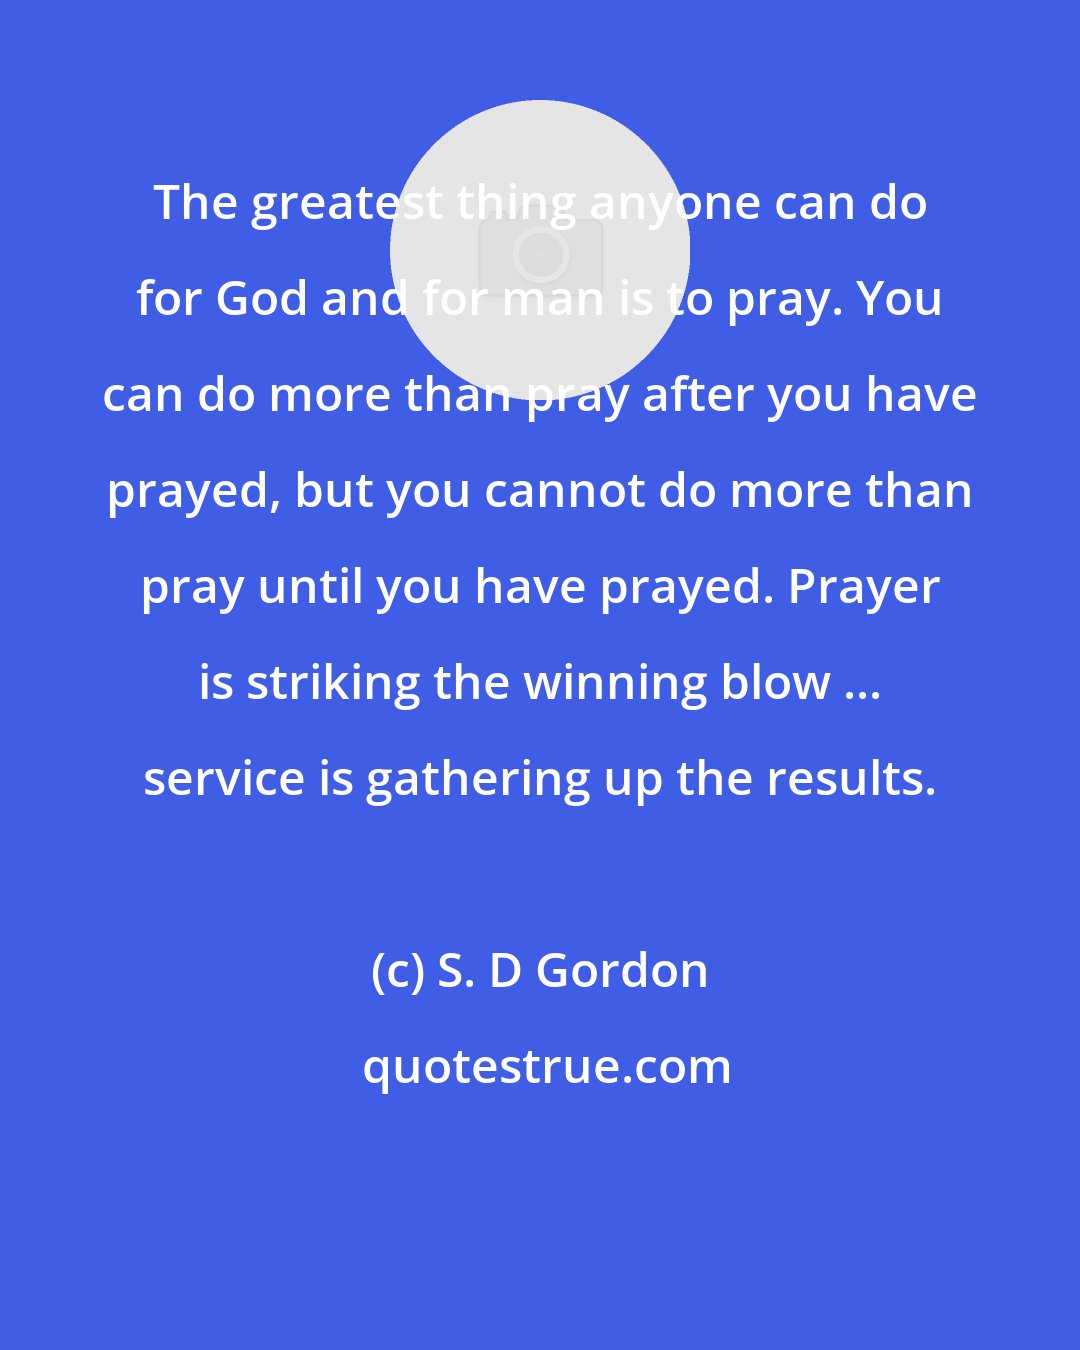 S. D Gordon: The greatest thing anyone can do for God and for man is to pray. You can do more than pray after you have prayed, but you cannot do more than pray until you have prayed. Prayer is striking the winning blow ... service is gathering up the results.